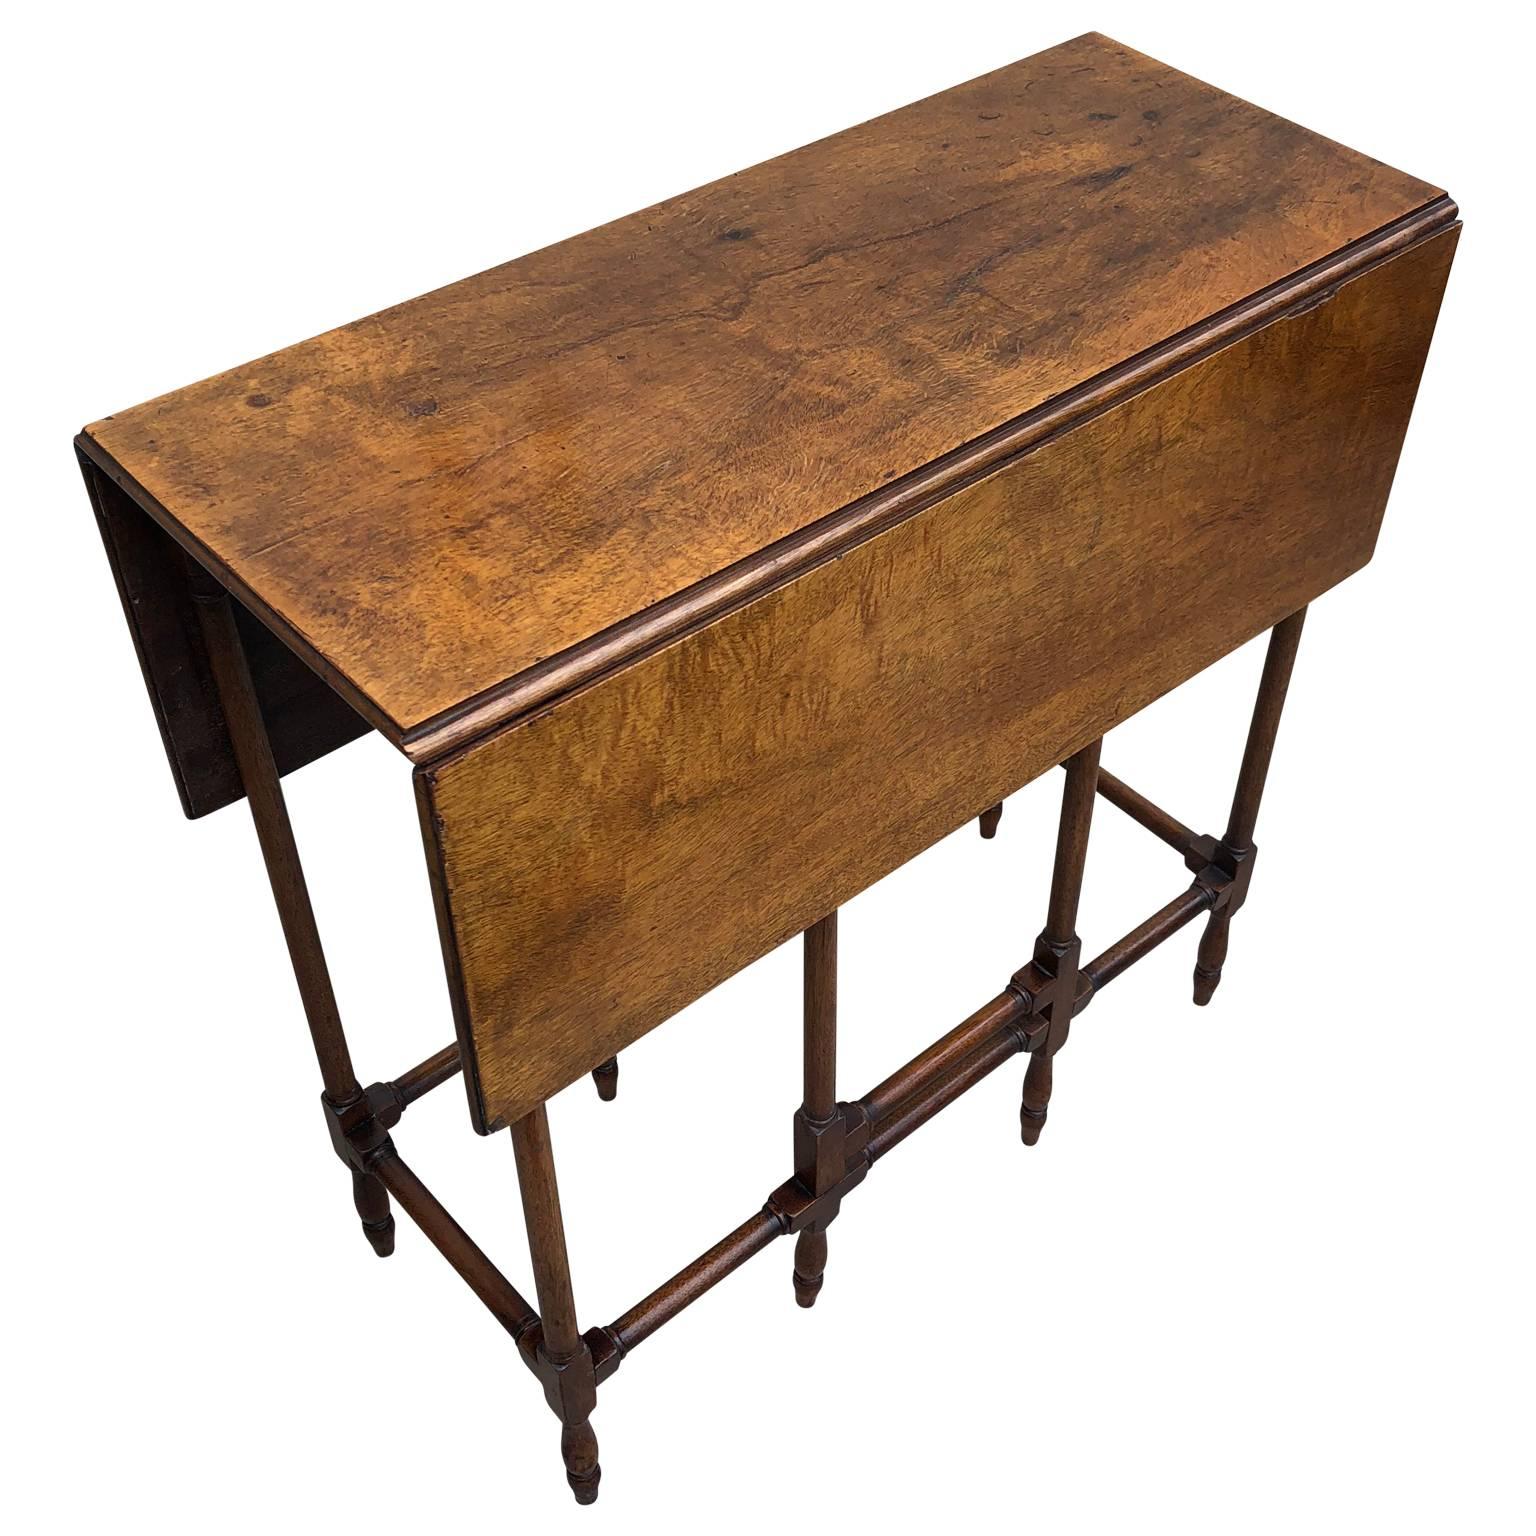 George III Style mahogany spider leg table

Georgian spider leg table with a rectangular top with two drop leaves that are supported by slender turned gate legs and are joined by carved and turned stretchers. Veneer has a beautiful glow, patina and